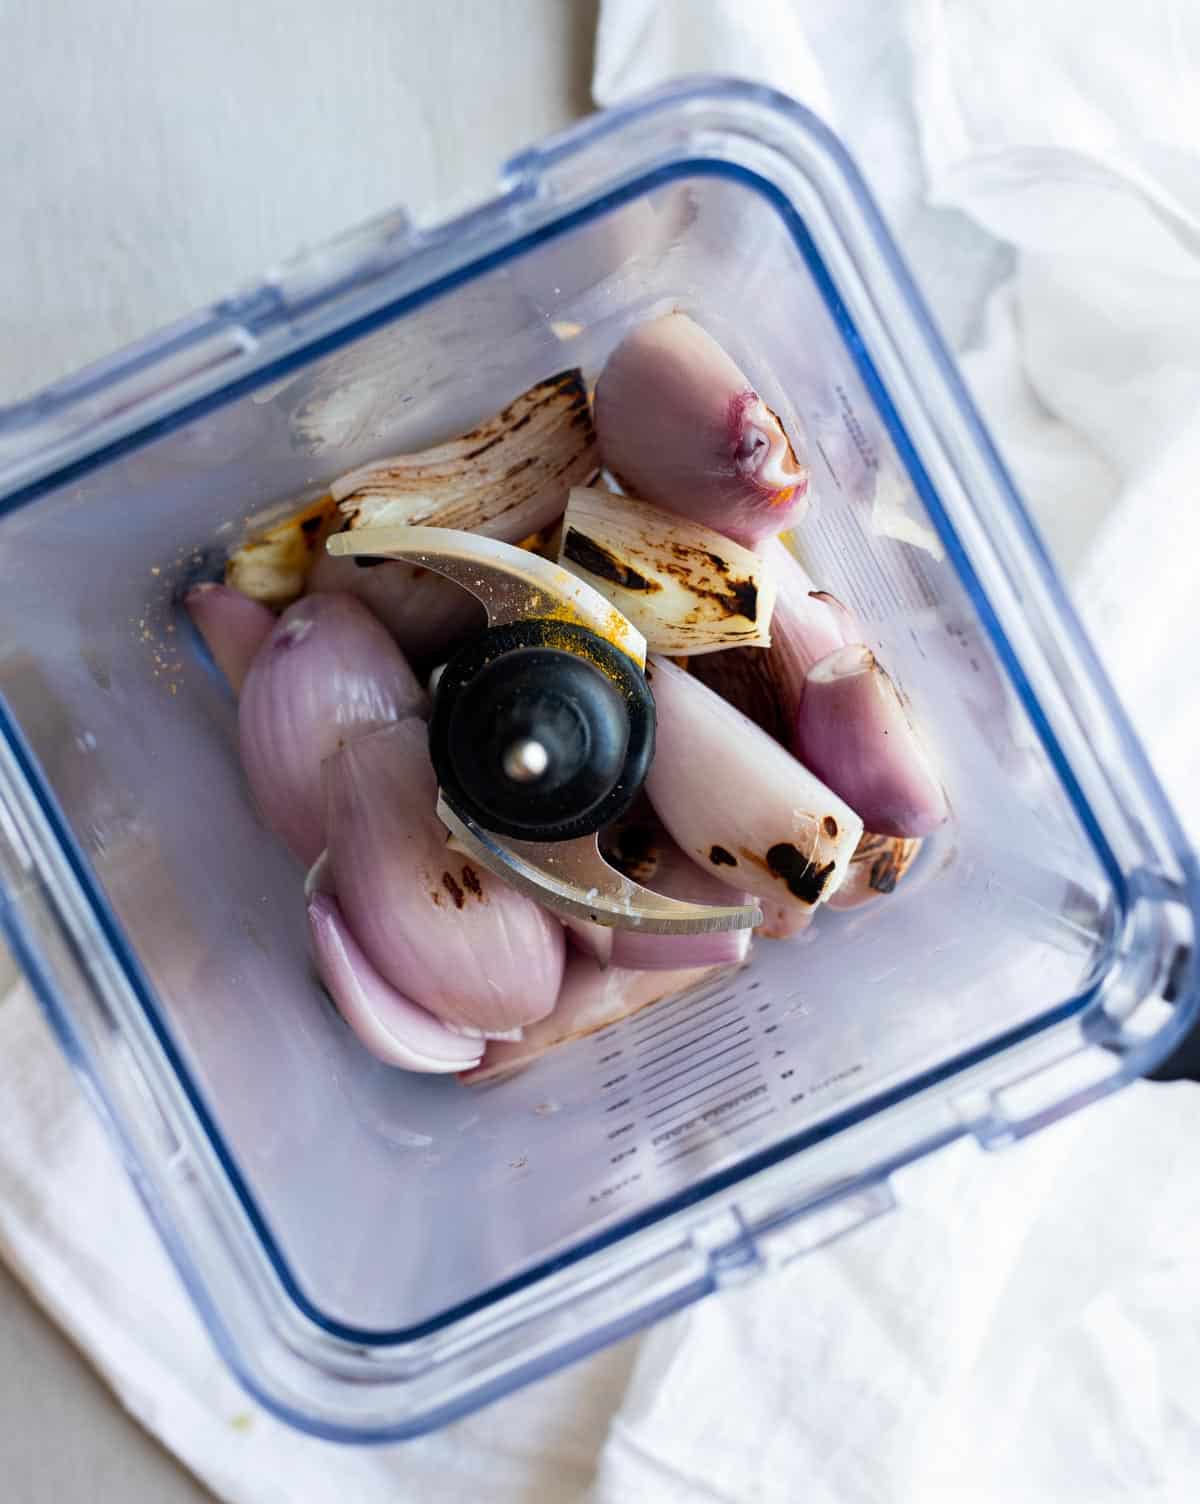 Charred shallots and garlic for the spice paste in a blender.